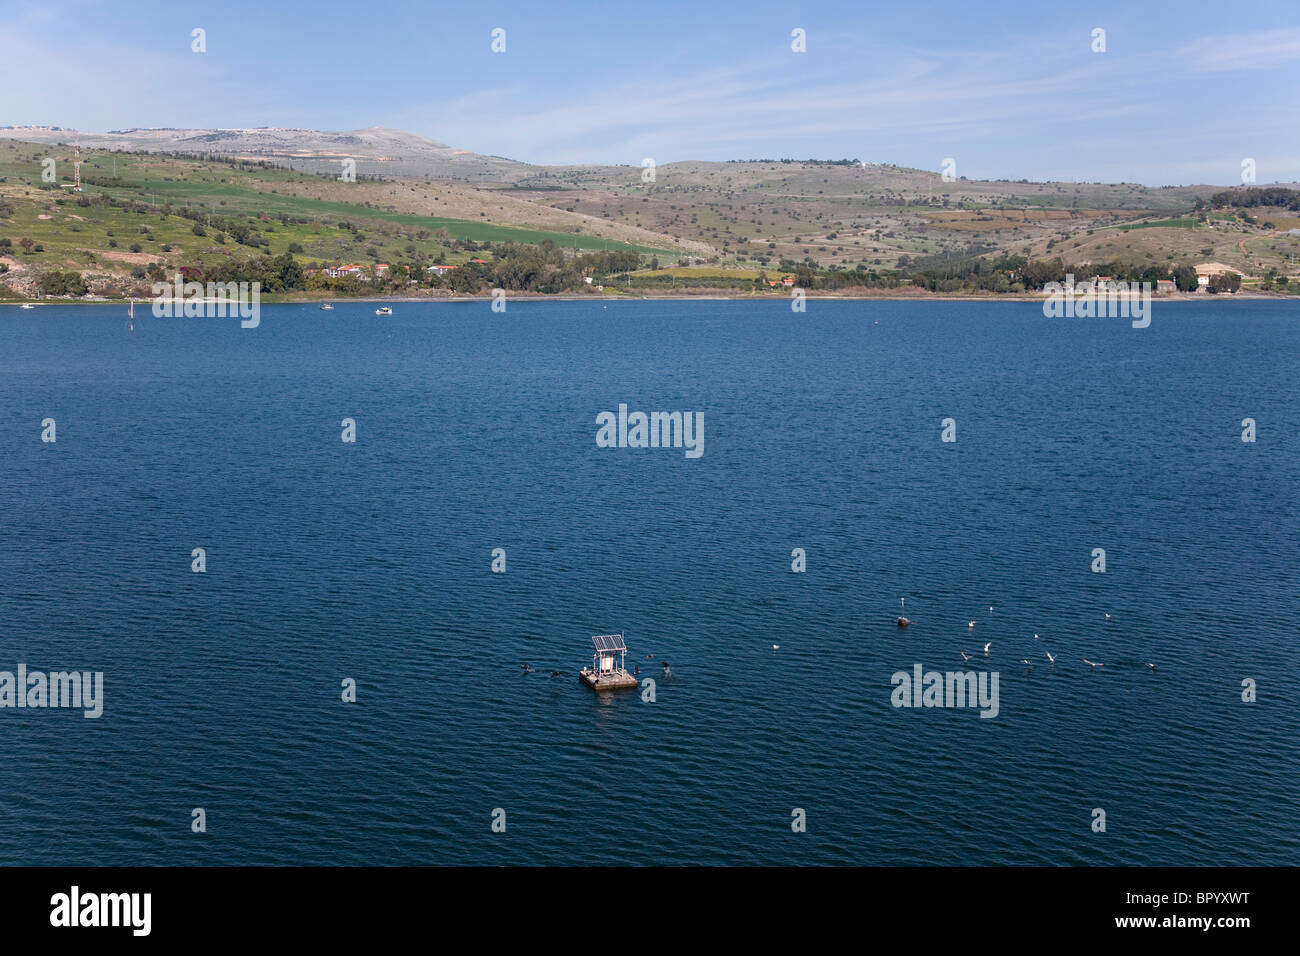 Aerial photograph of the Sea of Galilee Stock Photo